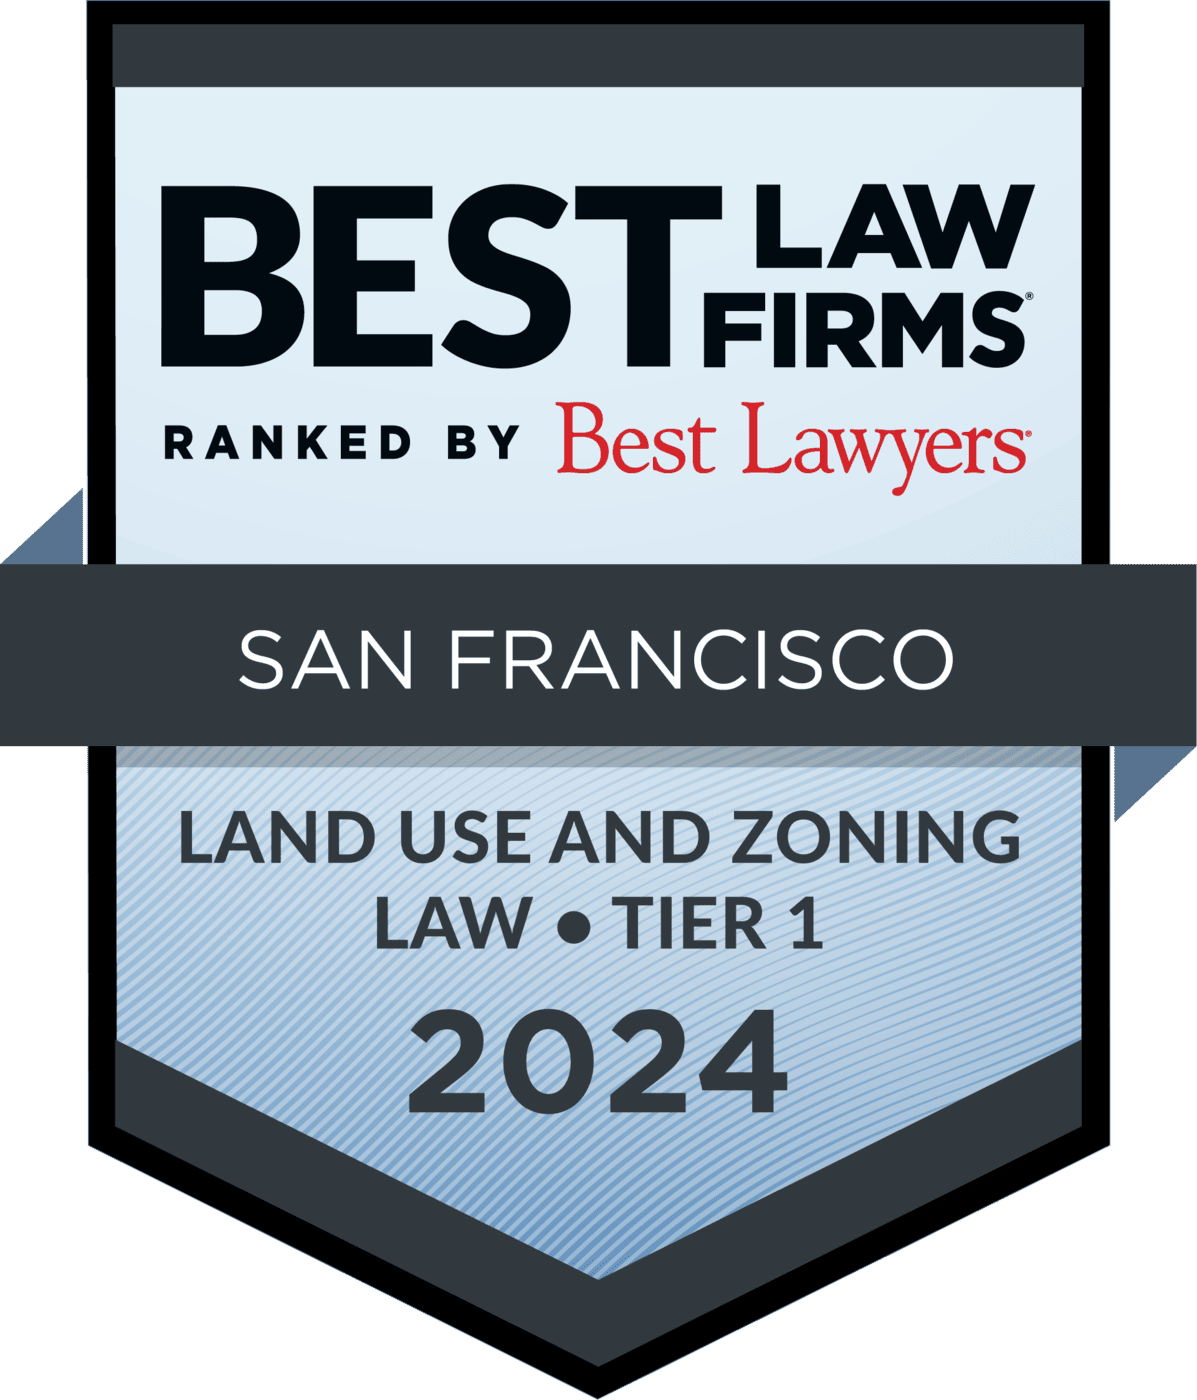 Best Law Firms San Francisco - Regional Land Use And Zoning Law Tier 1 Badge